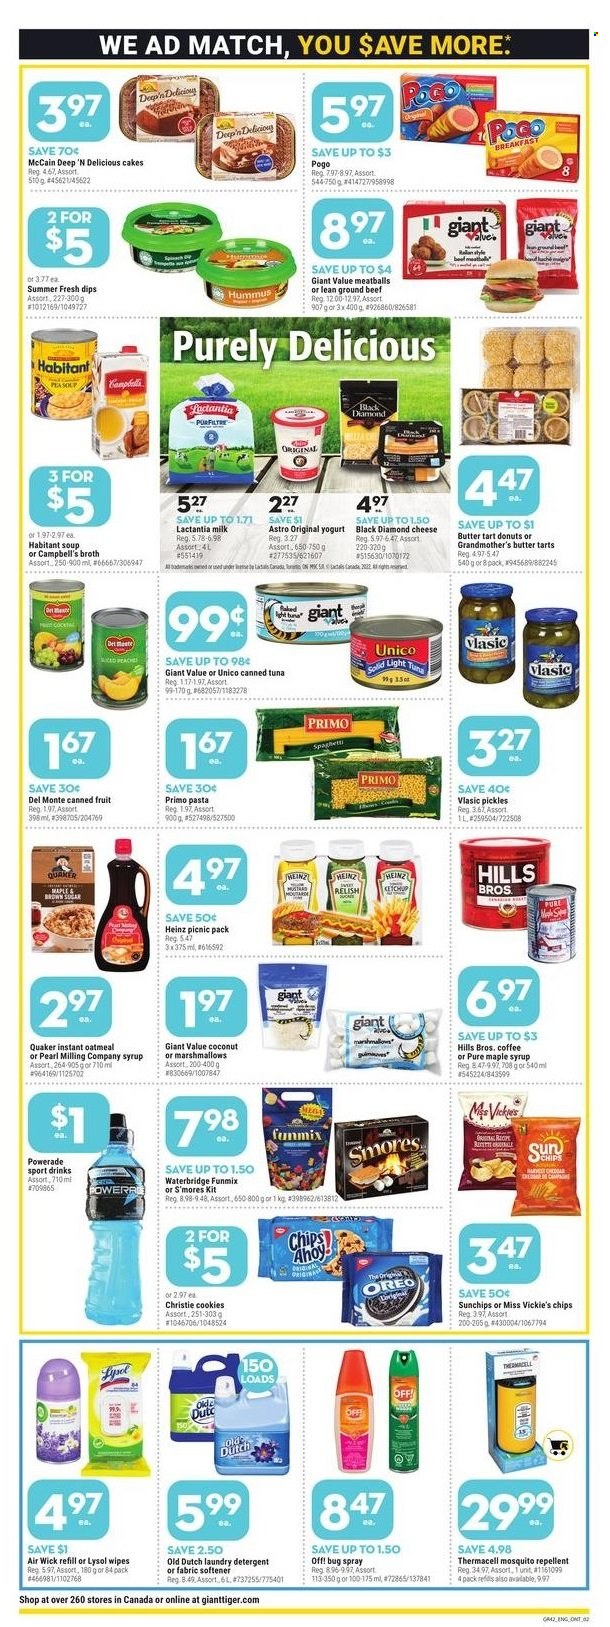 thumbnail - Giant Tiger Flyer - May 18, 2022 - May 24, 2022 - Sales products - cake, tart, donut, coconut, tuna, Campbell's, meatballs, soup, pasta, Quaker, hummus, yoghurt, milk, butter, McCain, cookies, marshmallows, chips, sugar, oatmeal, broth, canned tuna, pickles, light tuna, canned fruit, mustard, maple syrup, syrup, Powerade, coffee, beef meat, ground beef, wipes, Lysol, fabric softener, laundry detergent, repellent, Air Wick, Hill's, detergent, Heinz, ketchup, Oreo. Page 2.